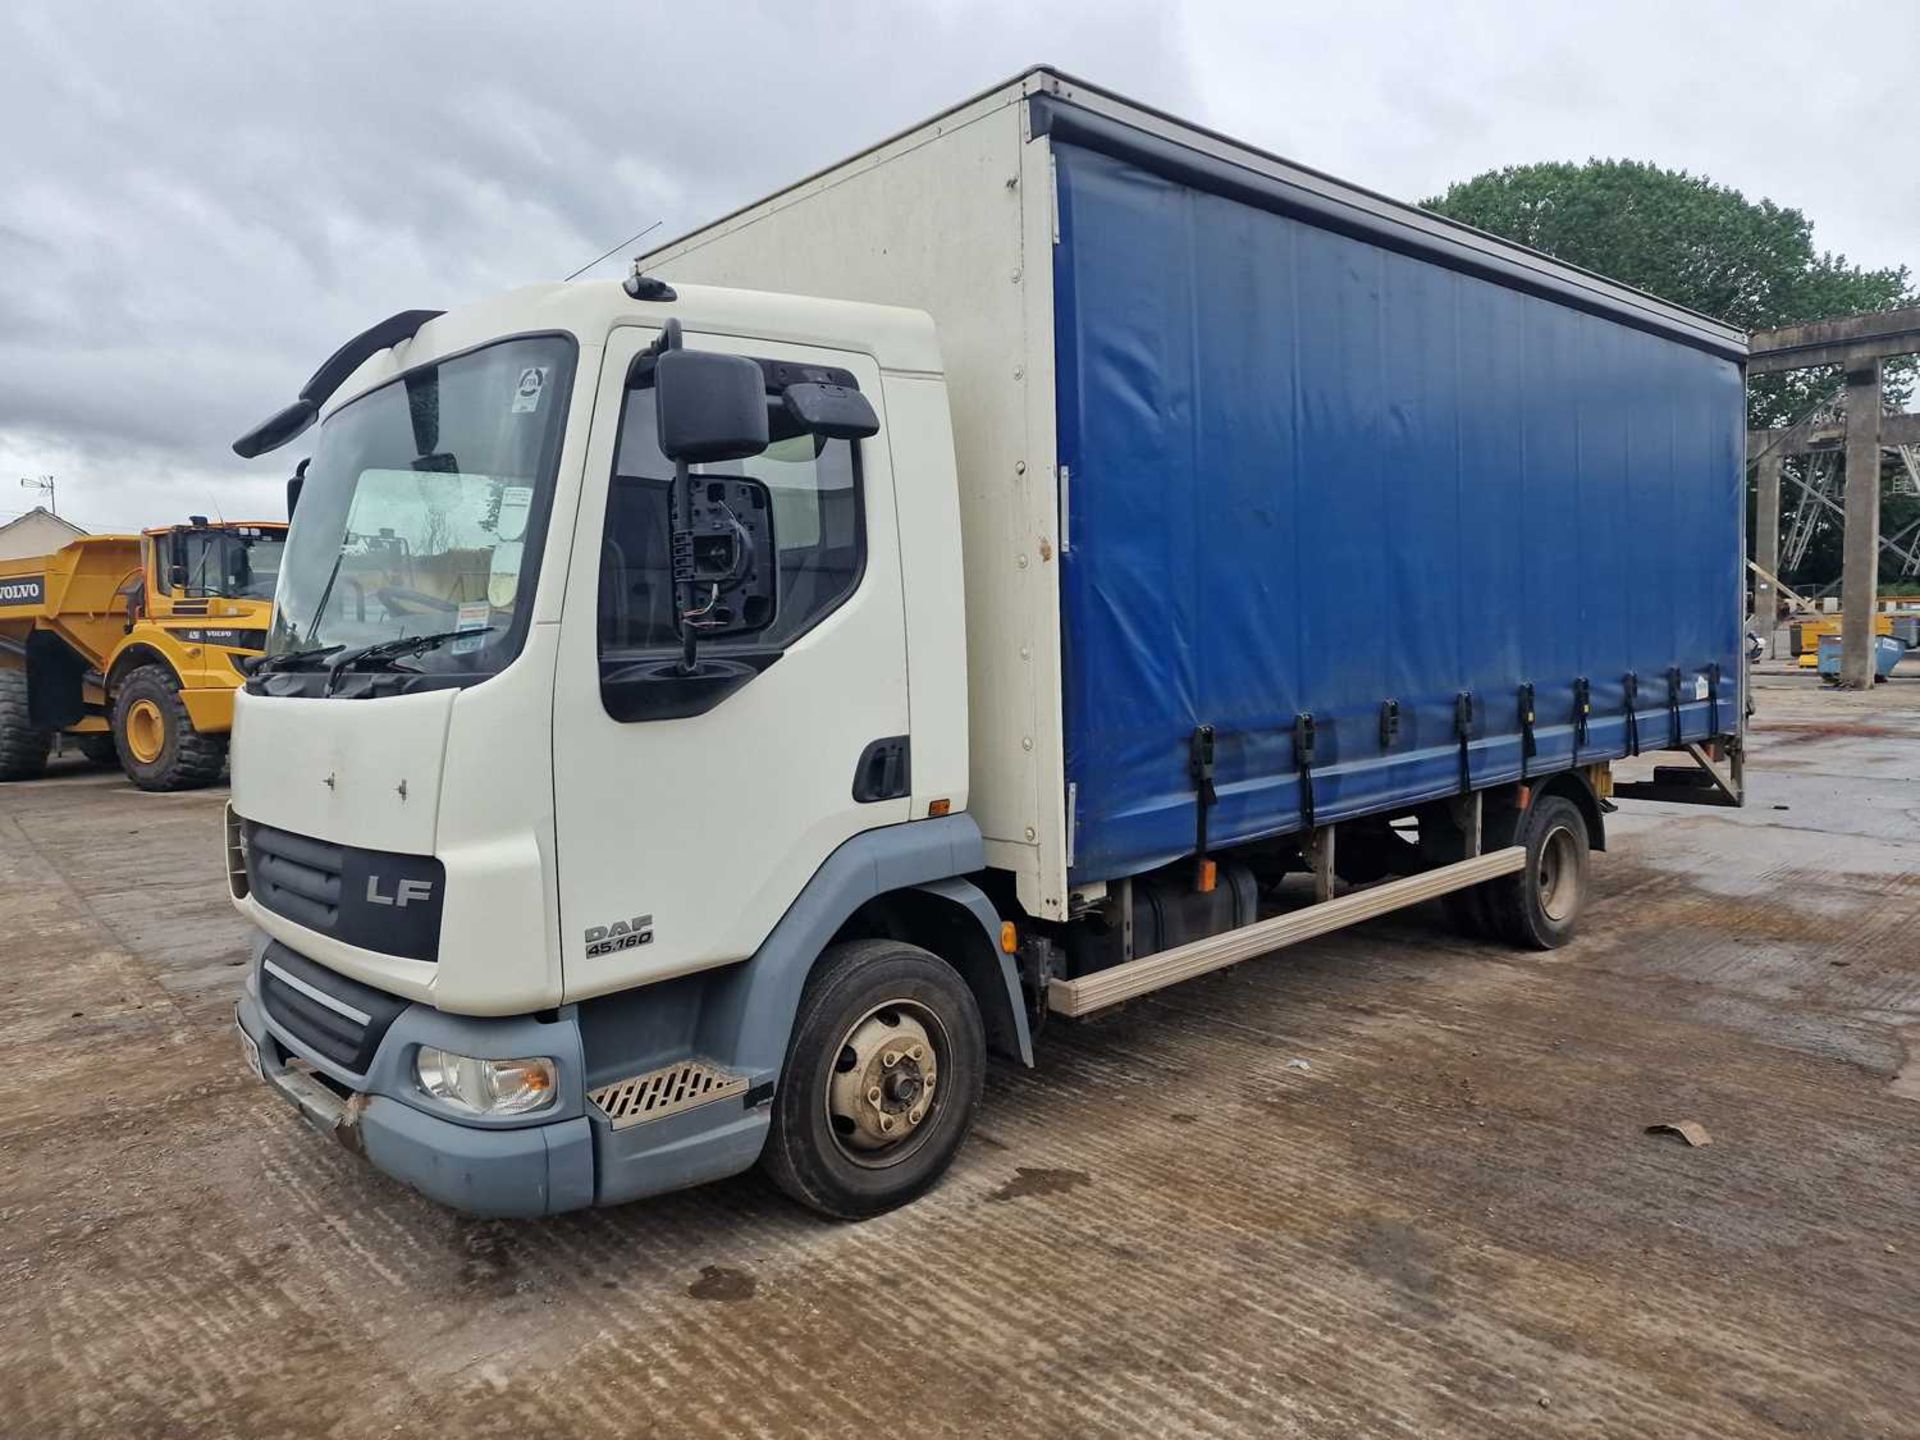 2006 DAF LF45.160 4x2 Curtainsider Lorry, Tailgate, Manual Gear Box (Reg. Docs. Available) - Image 21 of 40